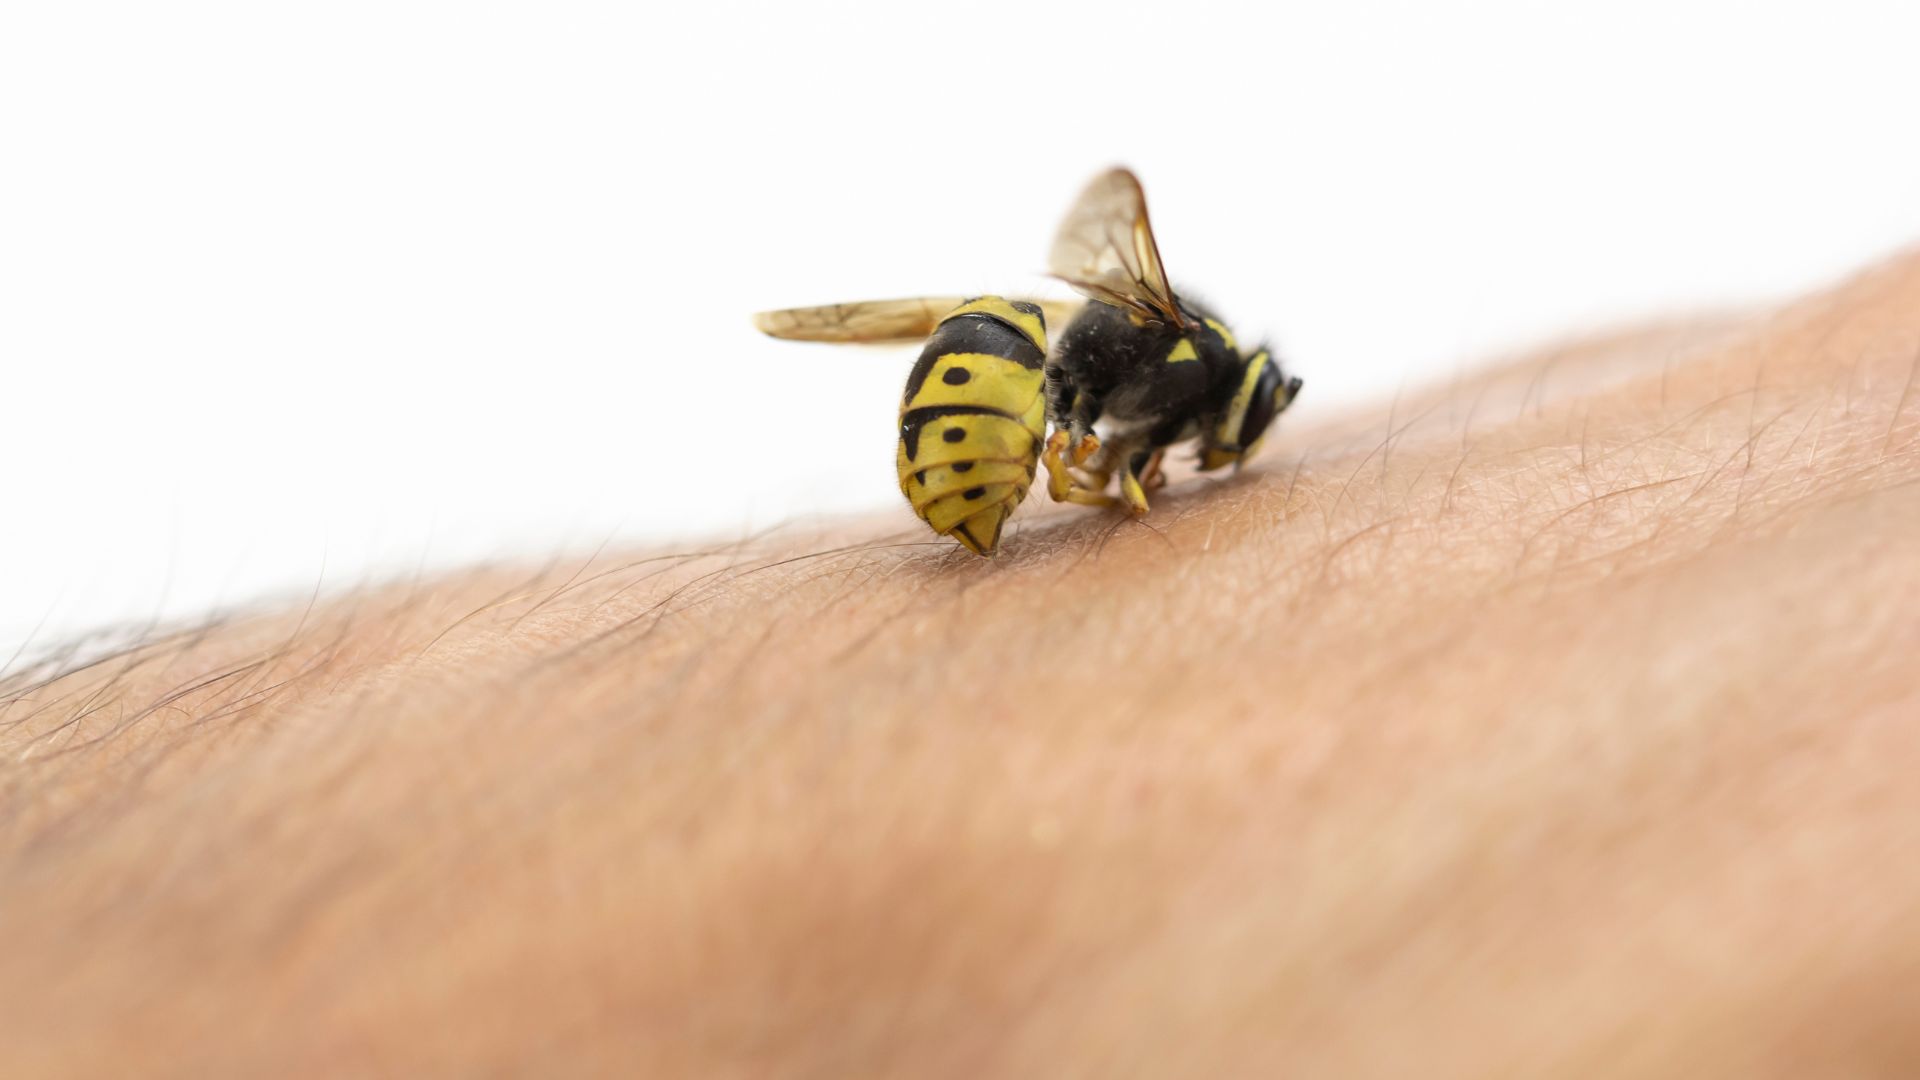 Have You Been Stung? What to Do When You’re Stung by an Insect or Bee